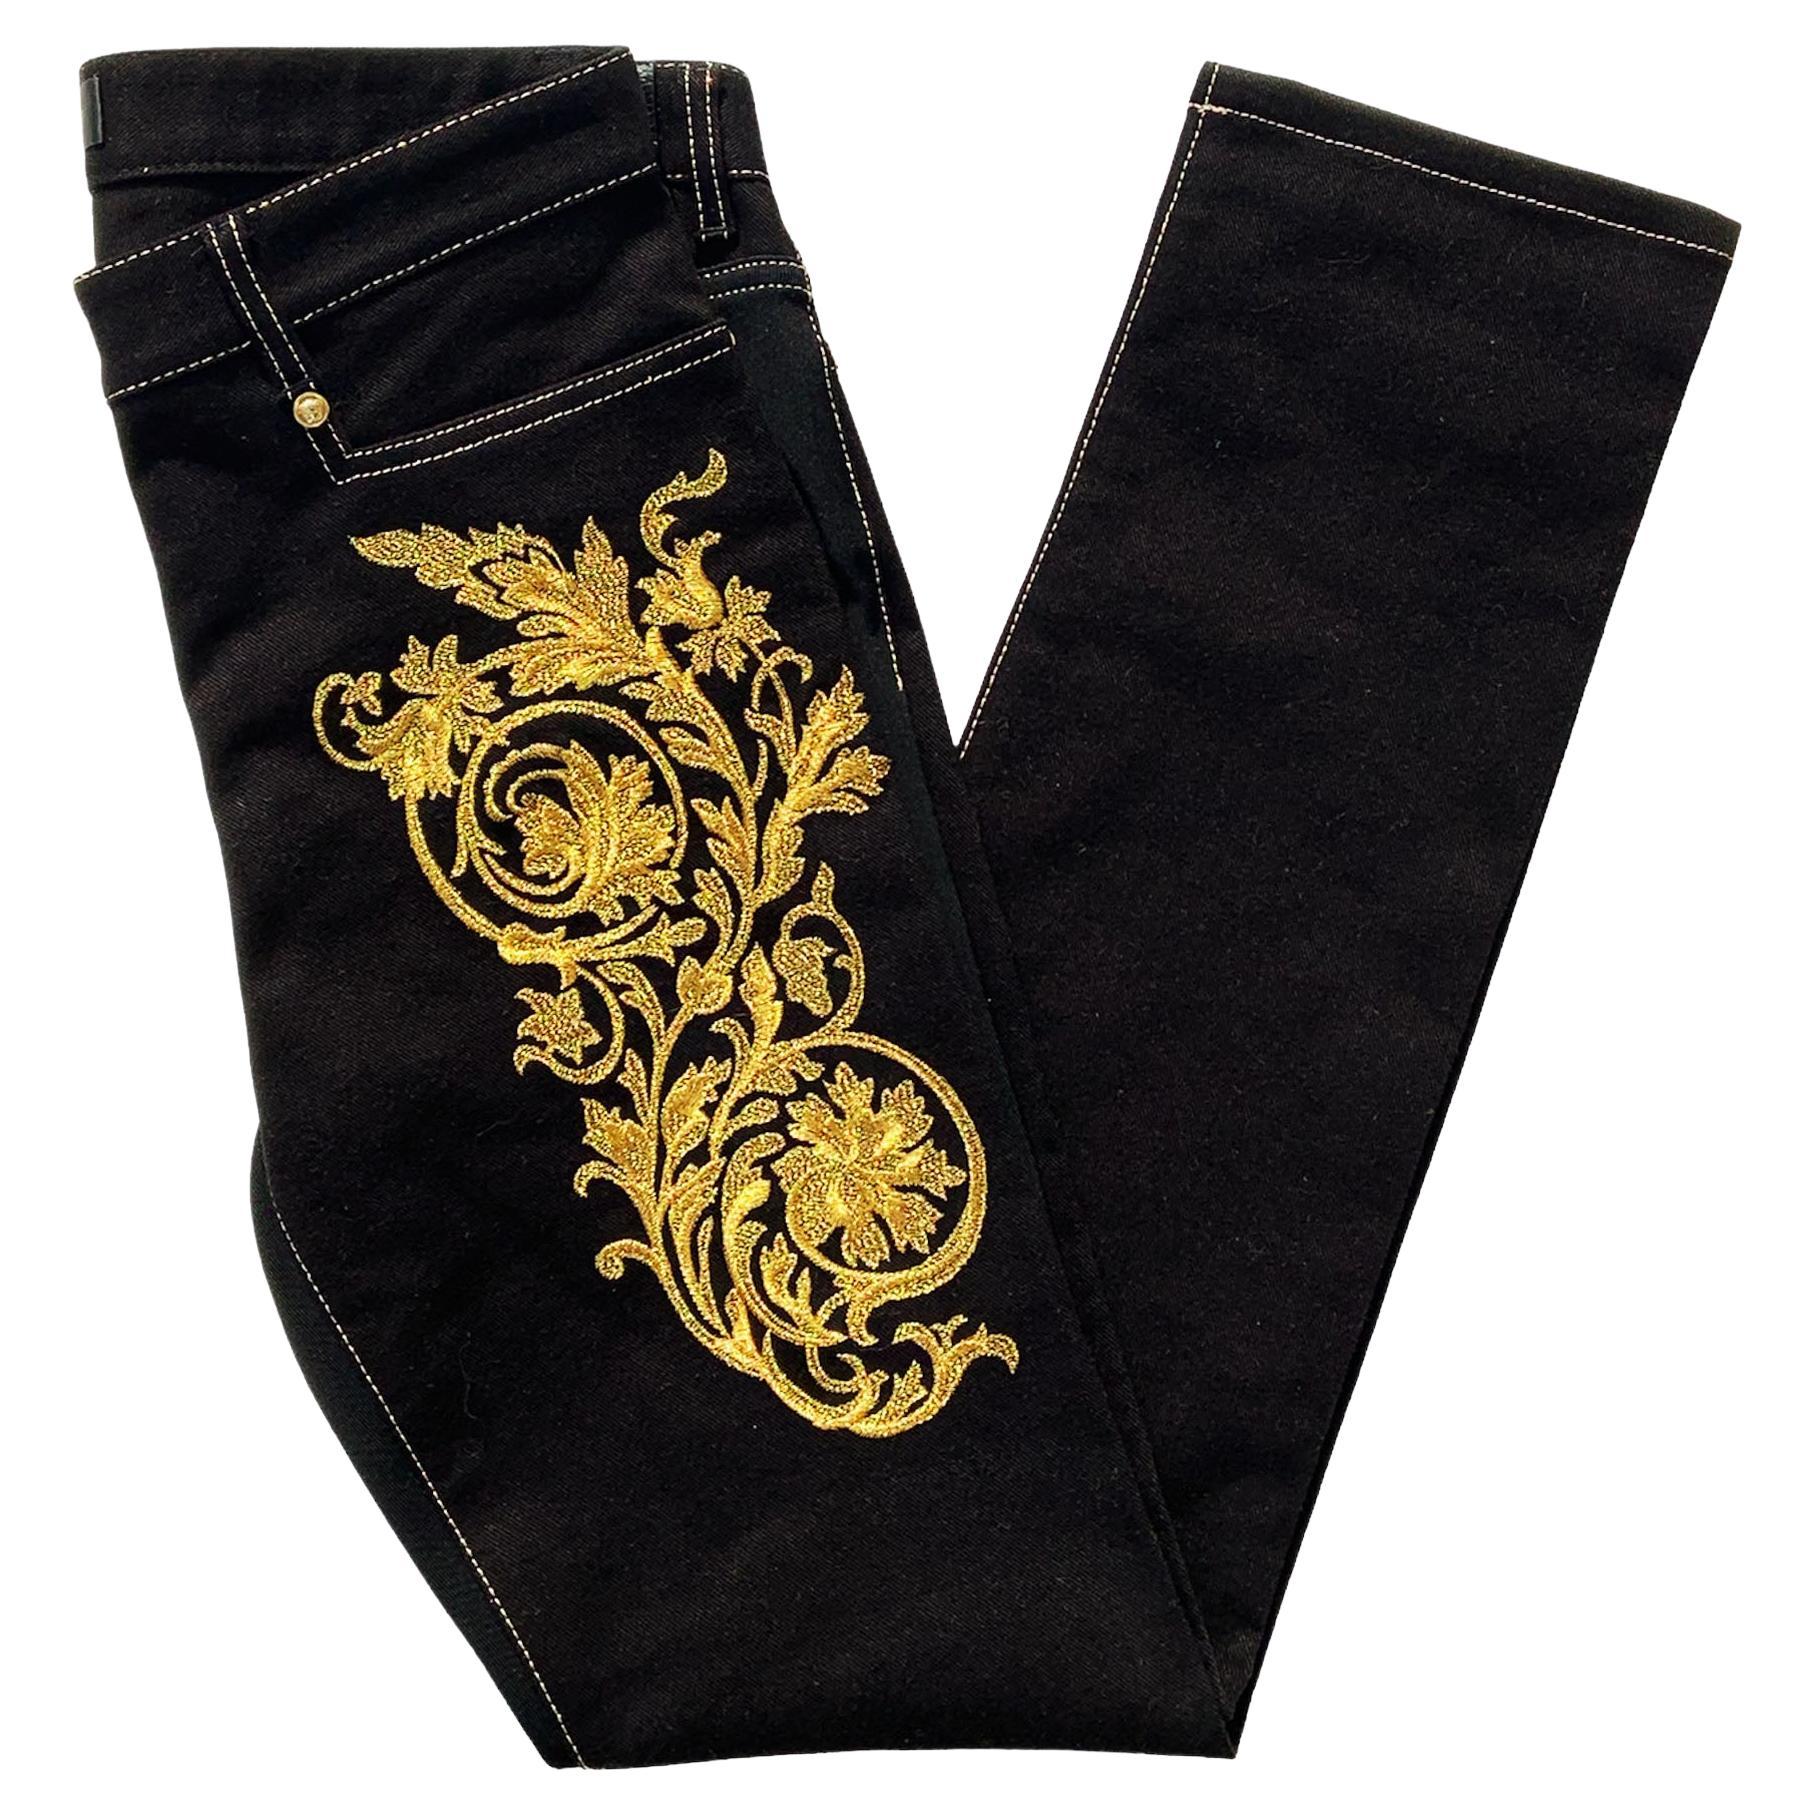 NWT Versace $2150 Black Gold Baroque Embroidery Stretch Jeans size 27 and 26 For Sale